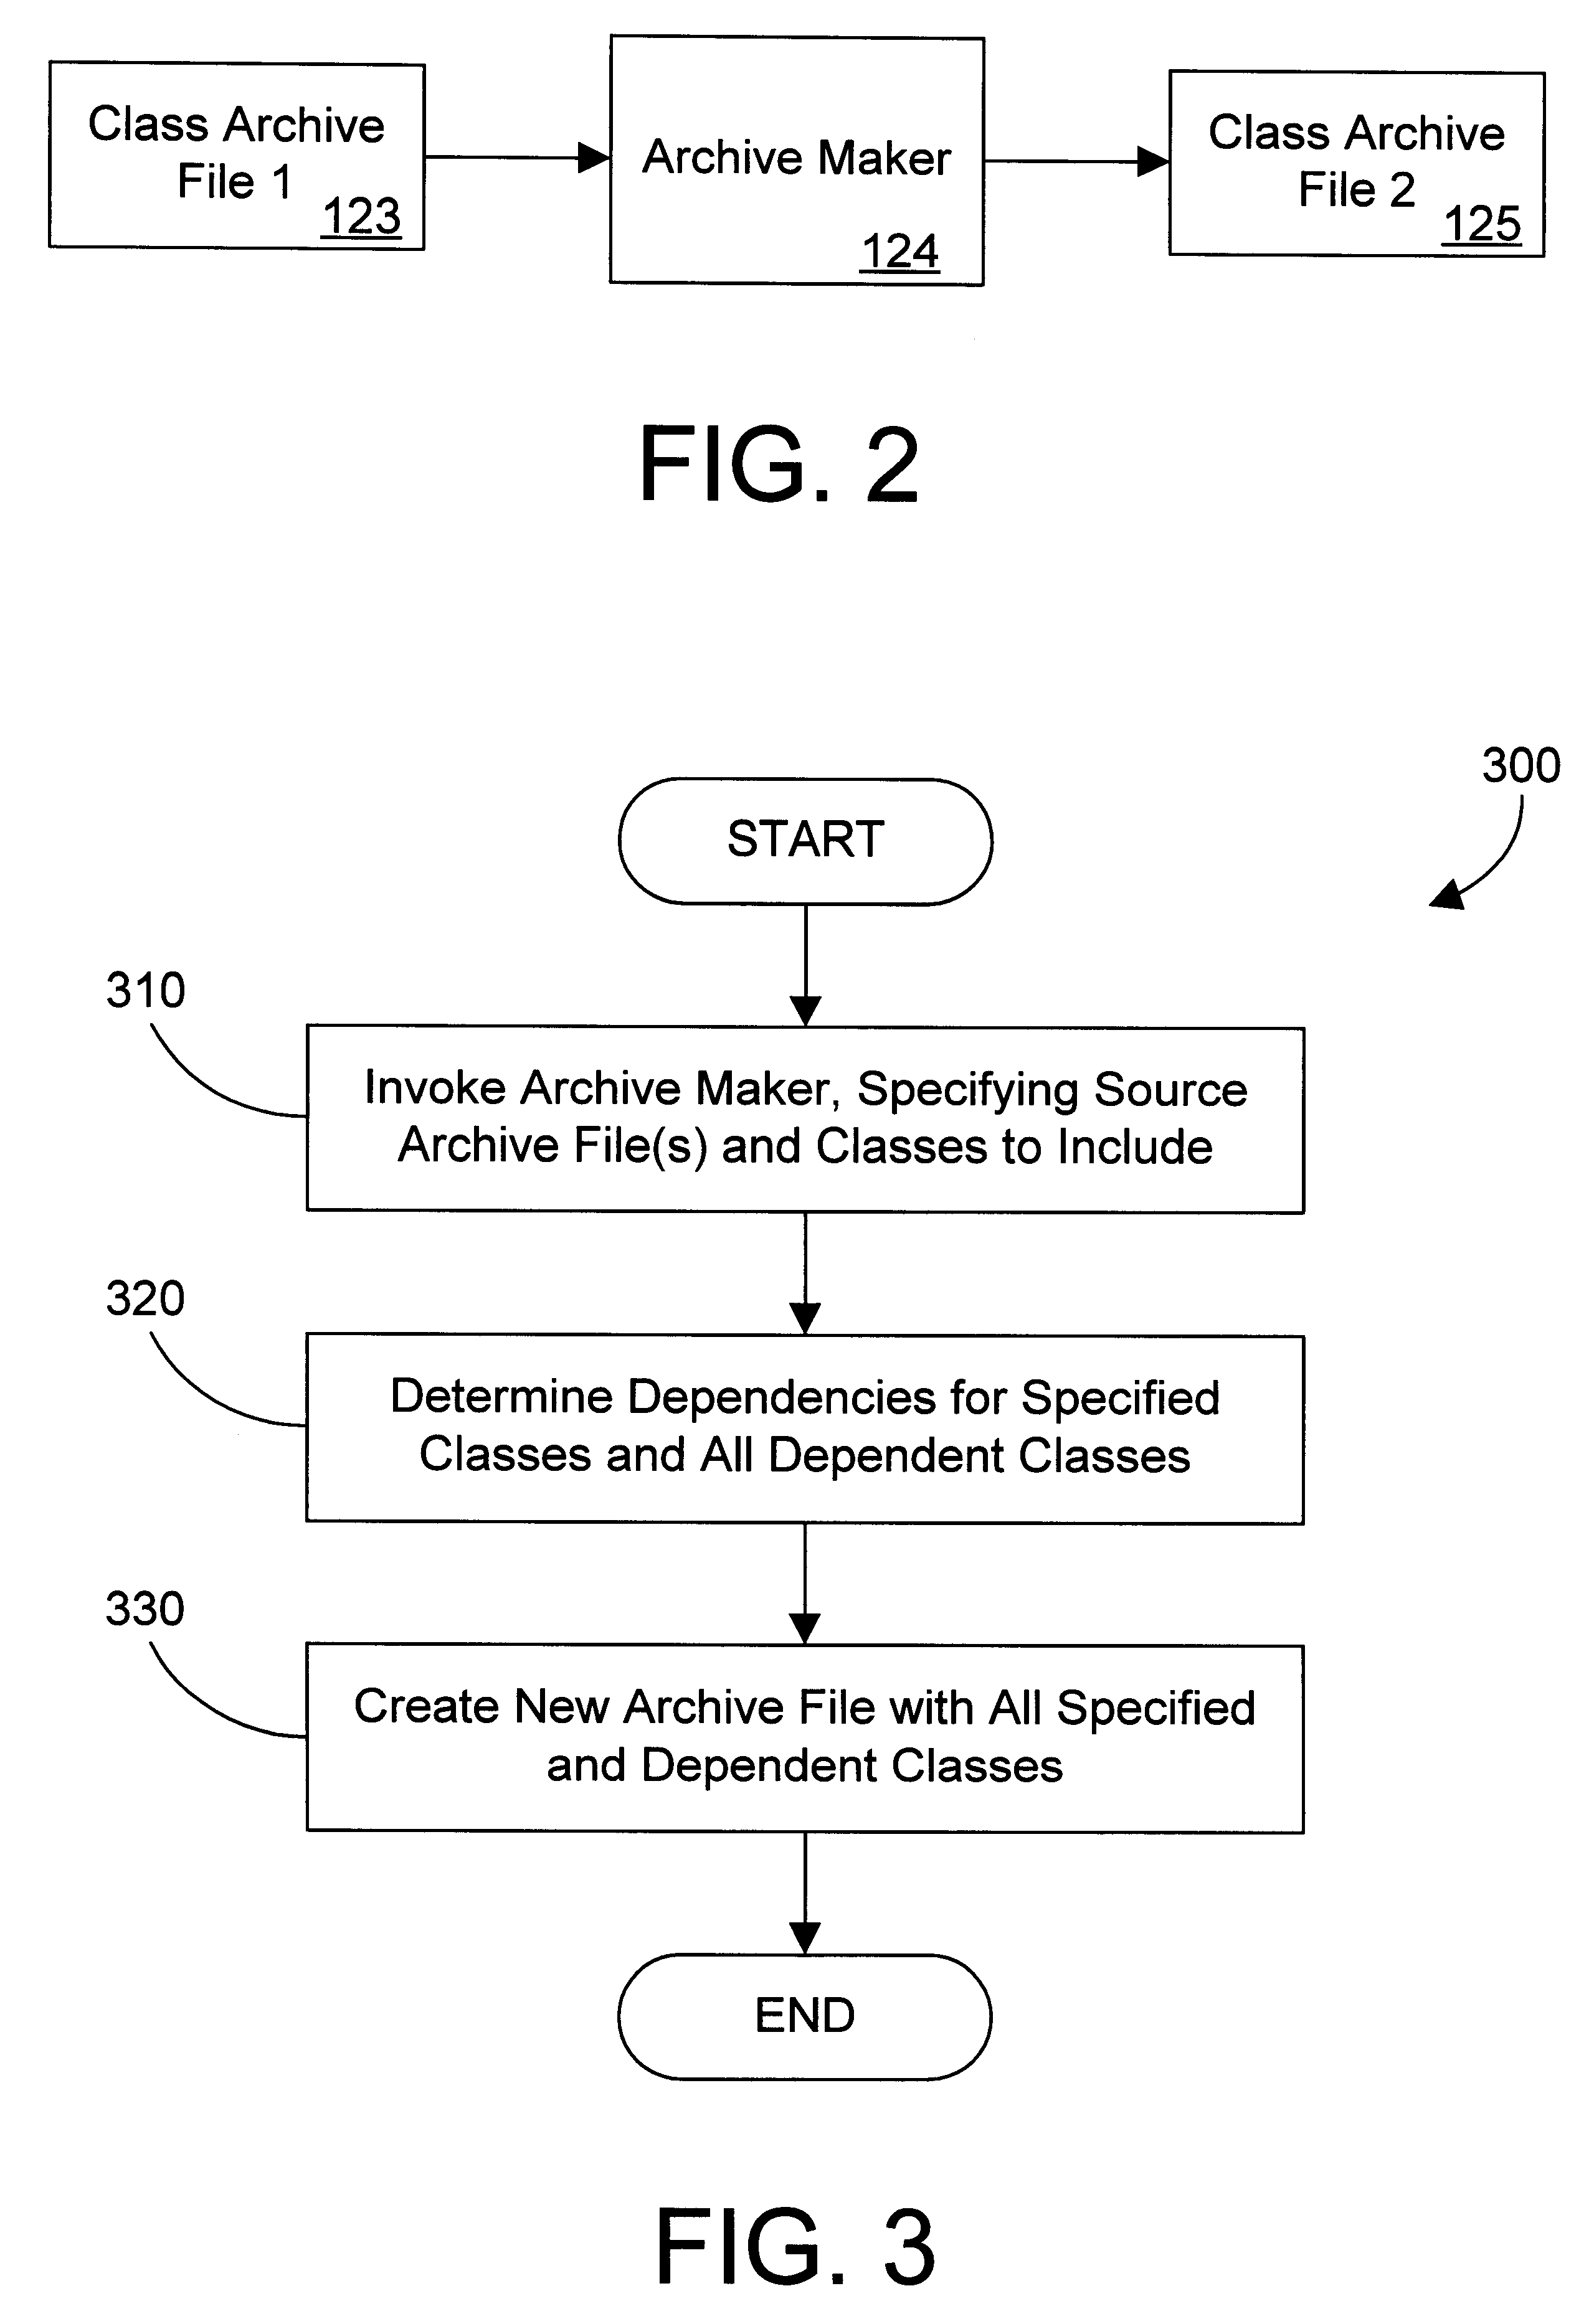 Object oriented class archive file maker and method